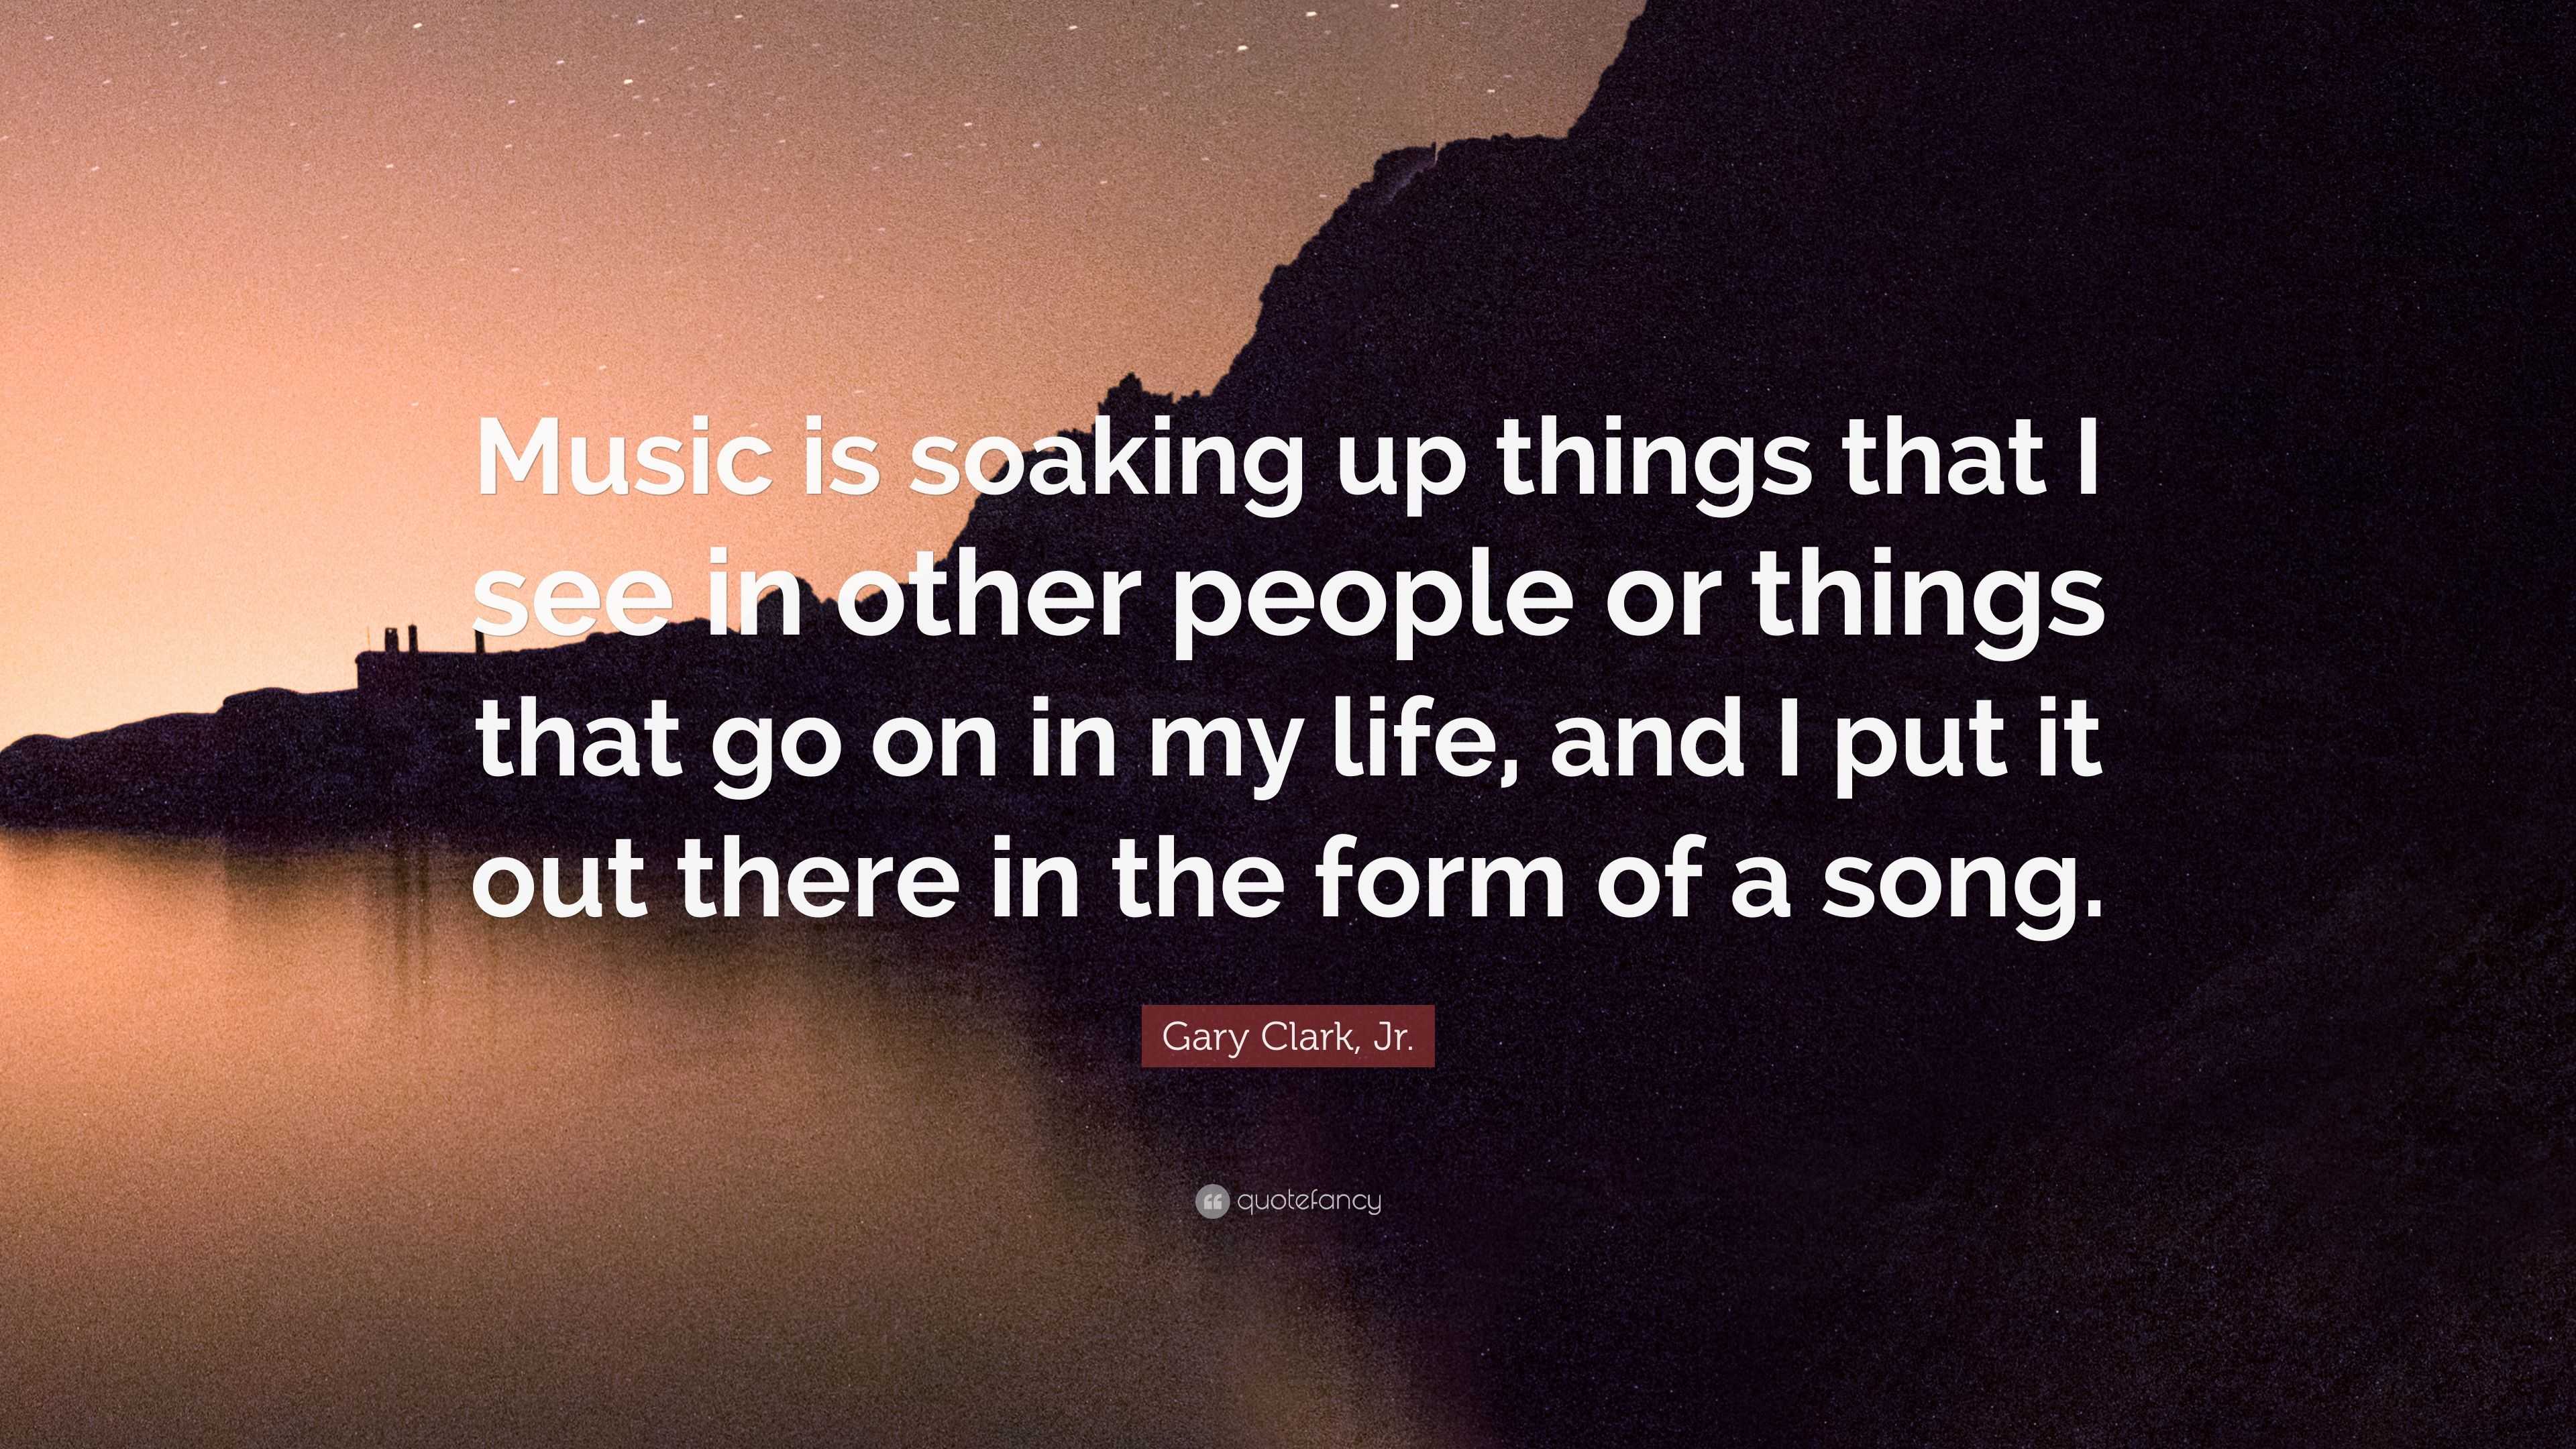 Gary Clark Jr Quote “Music is soaking up things that I see